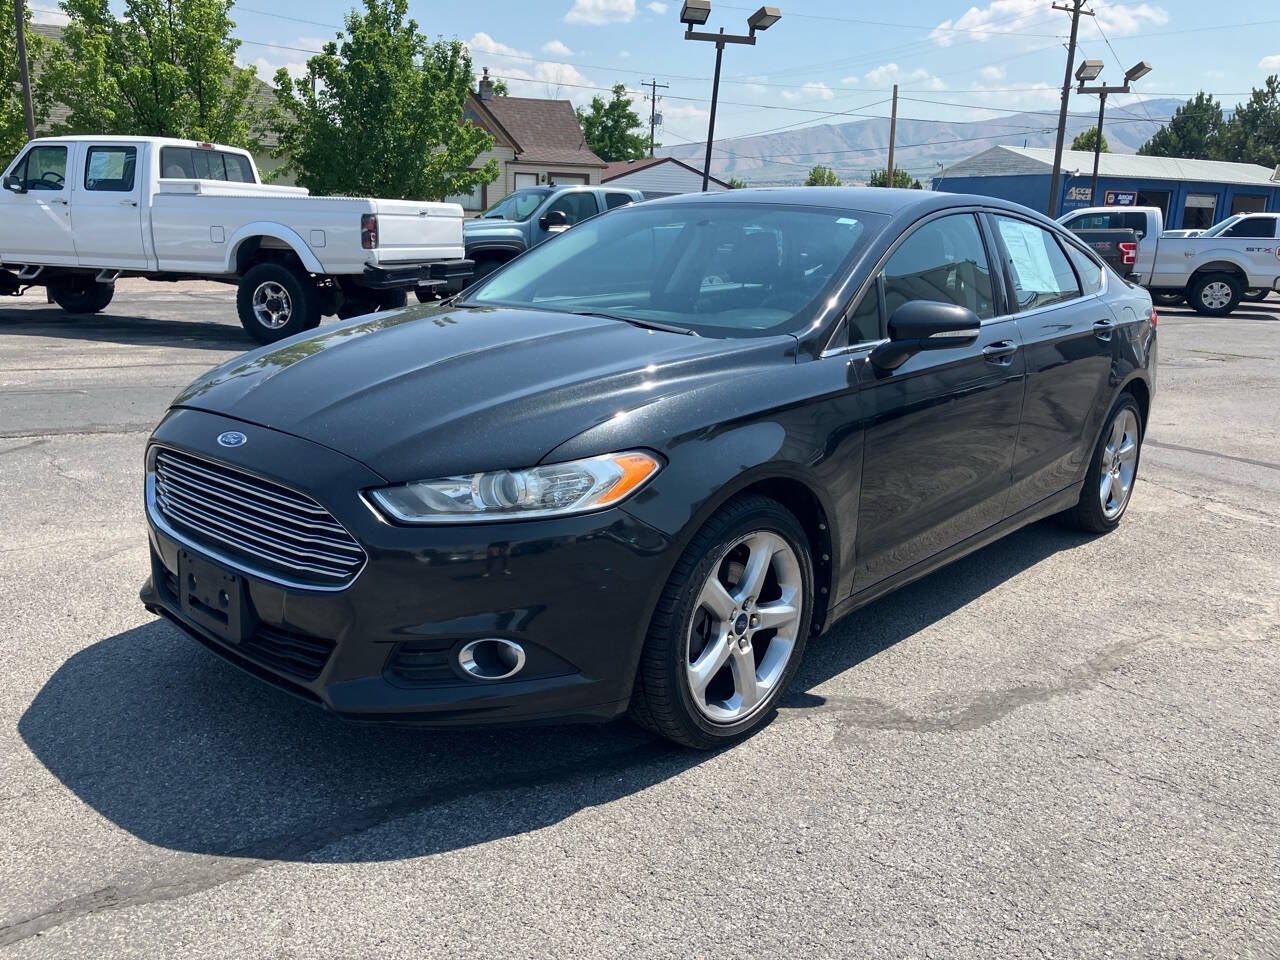 2013 - Ford - Fusion - $7,995